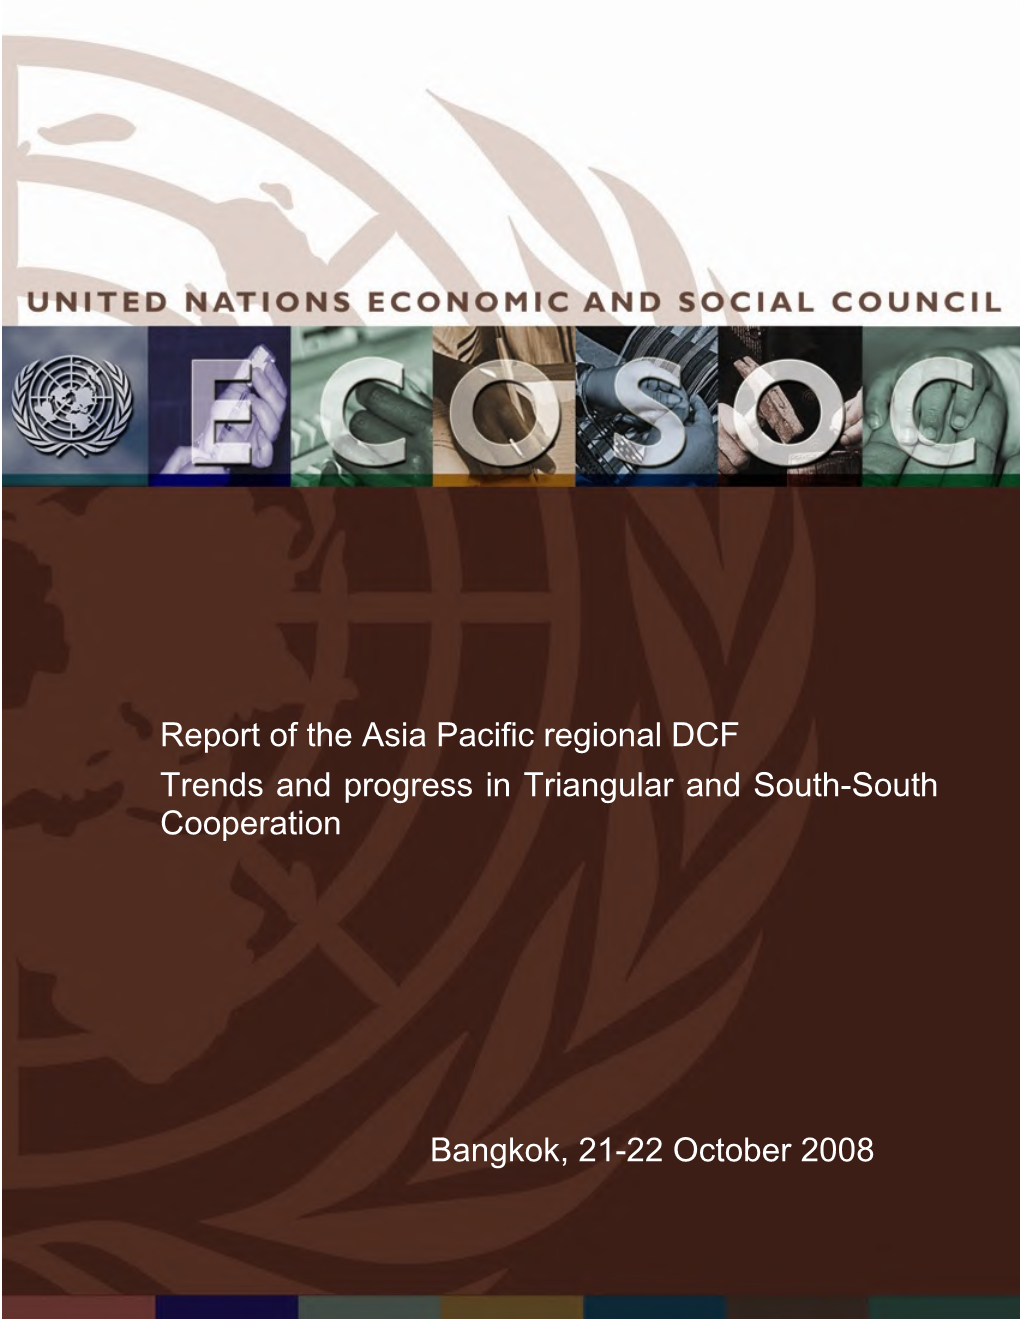 Report of the Asia Pacific Regional DCF Trends and Progress in Triangular and South-South Cooperation